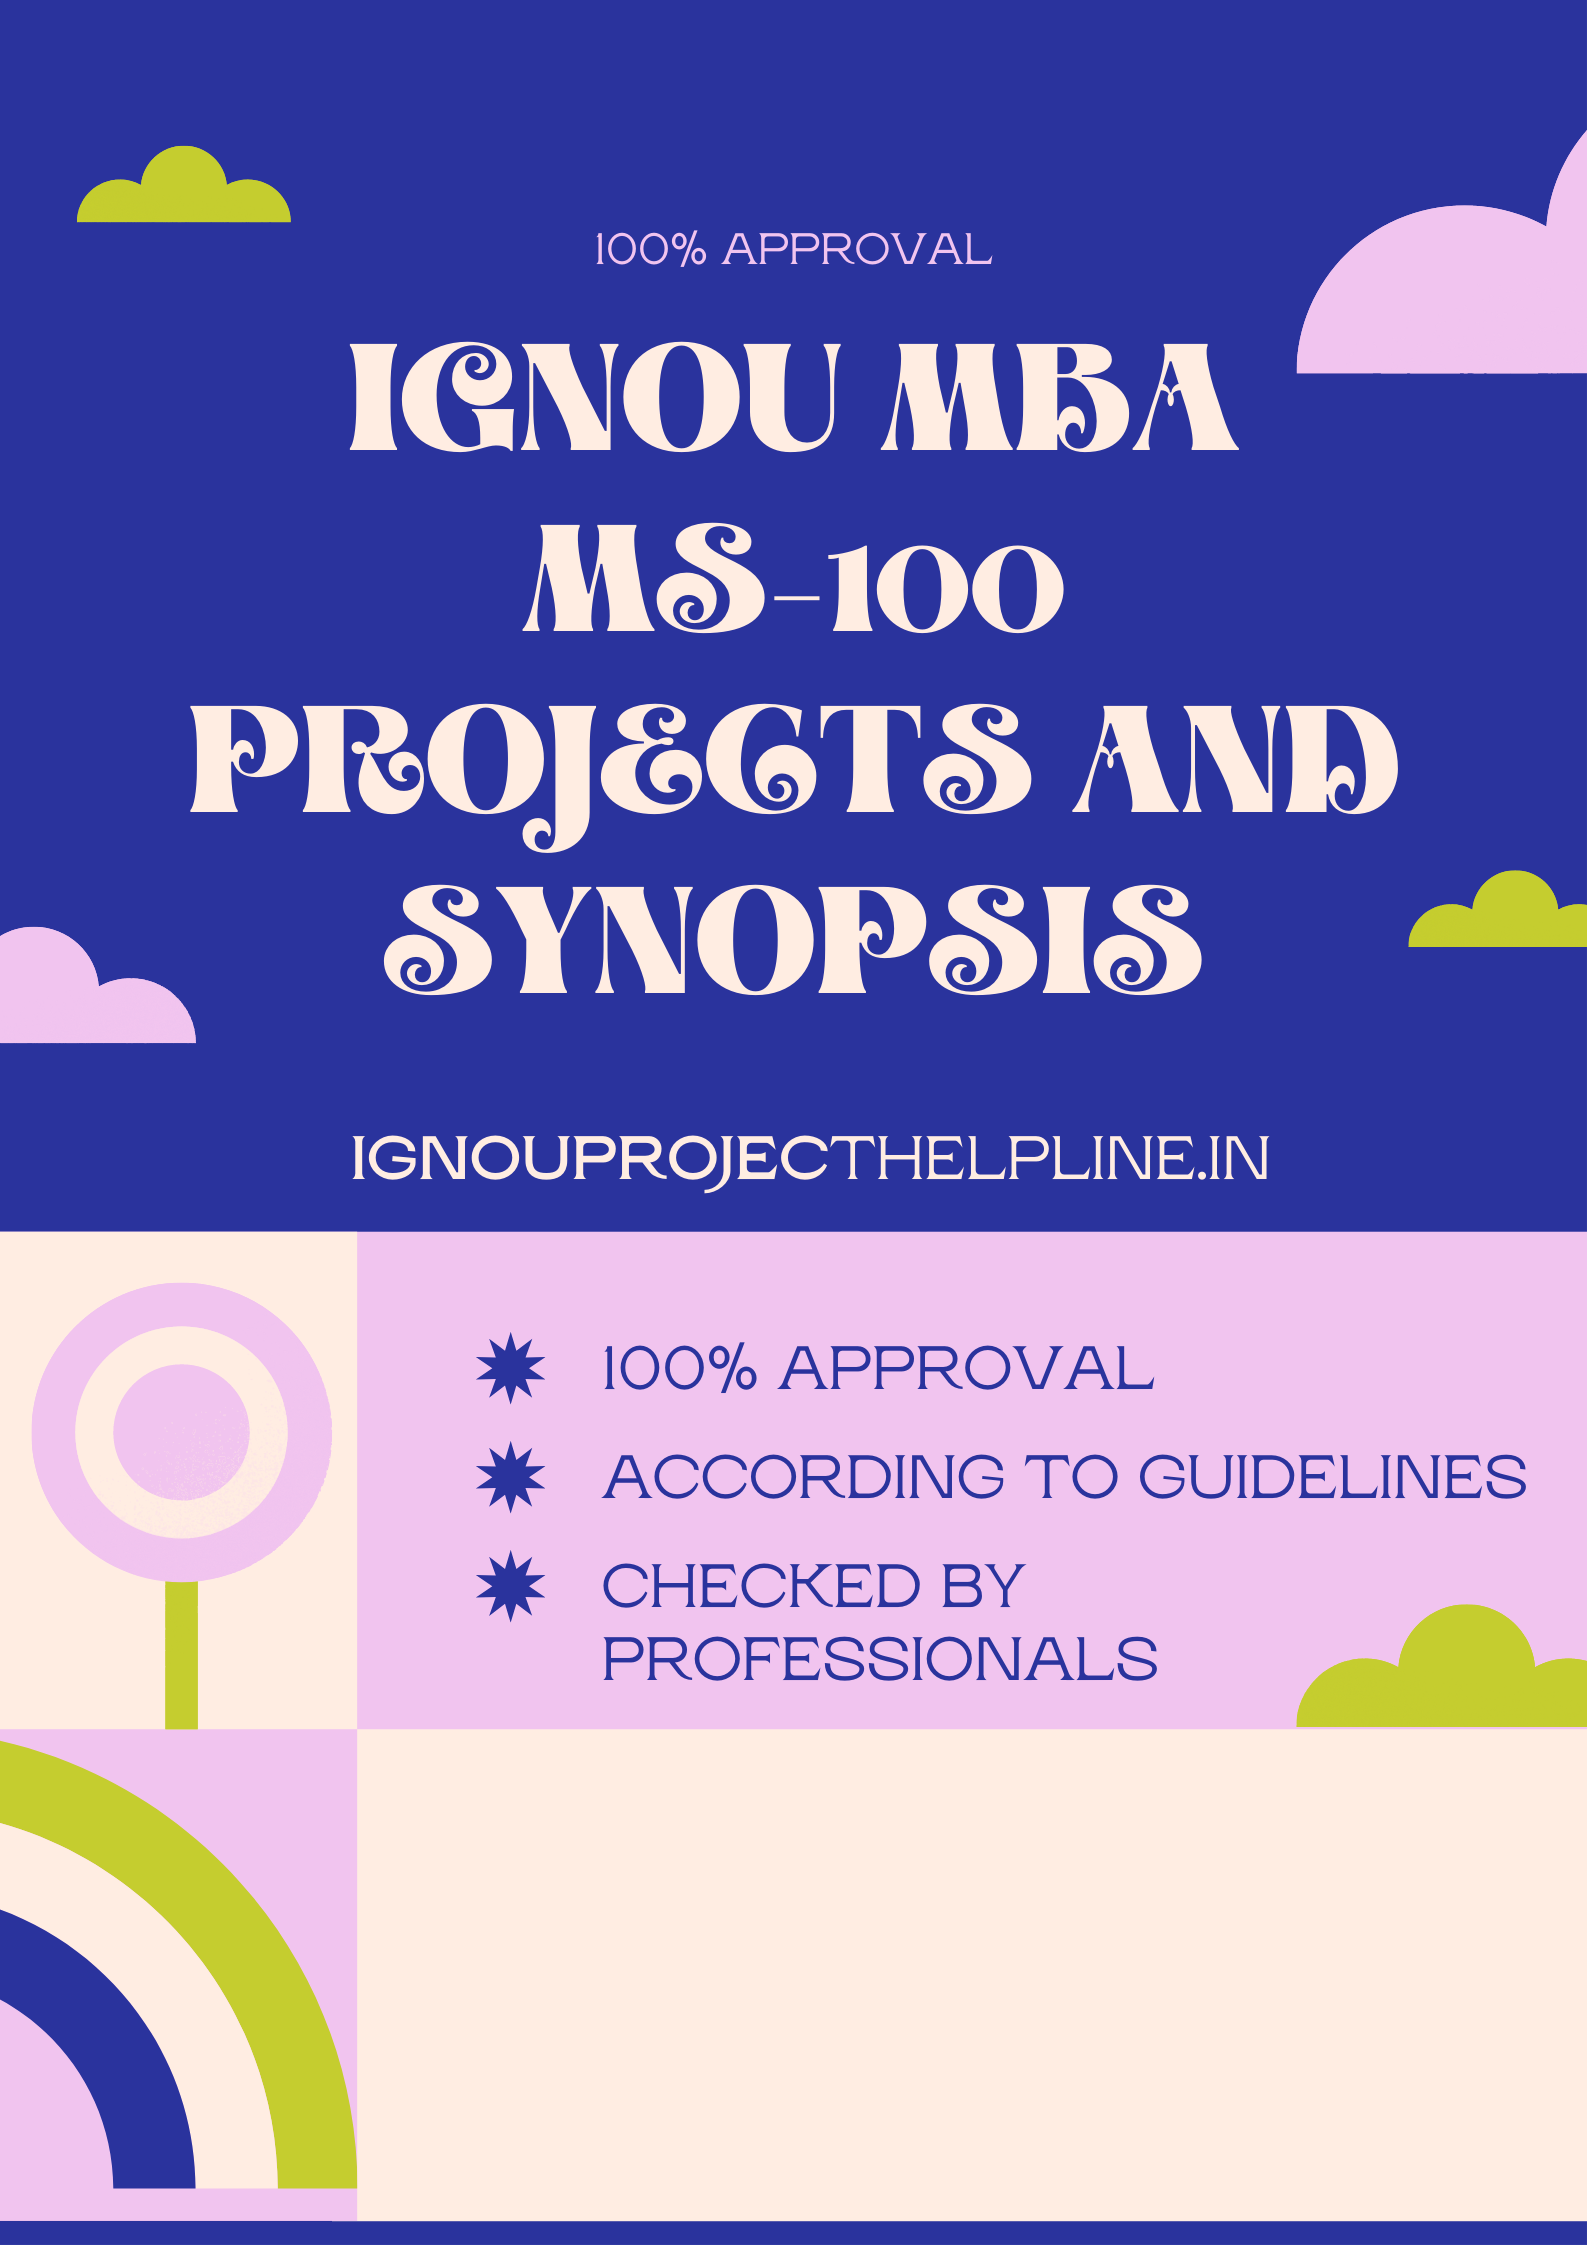 IGNOU MBA MS-100 PROJECTS AND SYNOPSIS